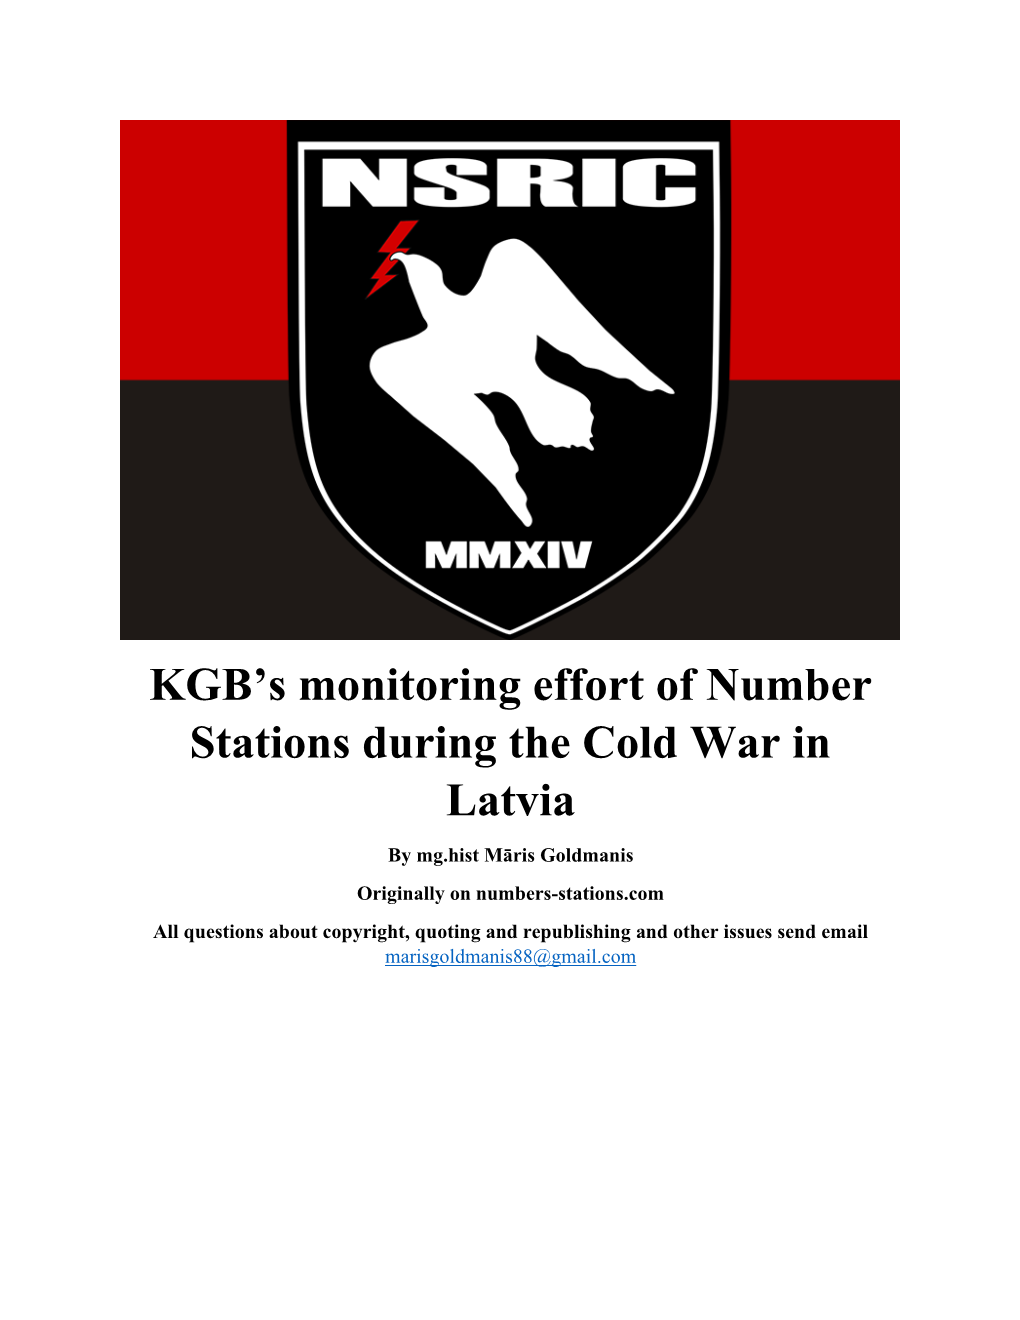 KGB's Monitoring Effort of Number Stations During the Cold War in Latvia